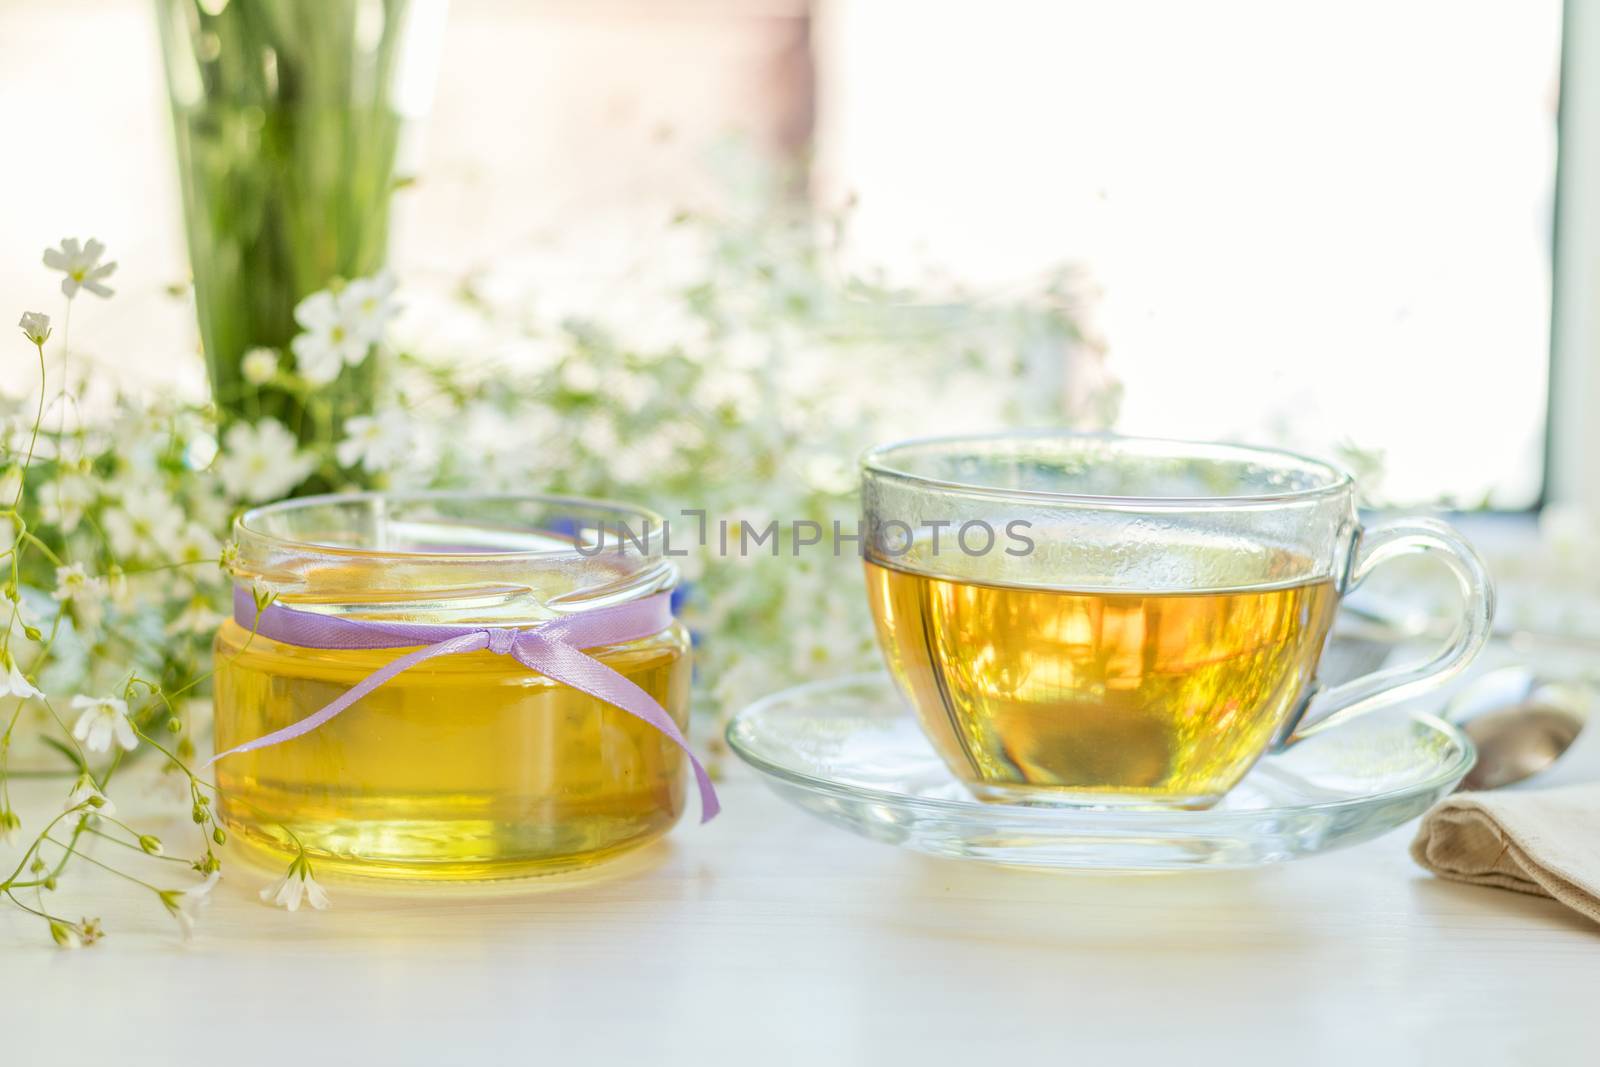 Honey in glass jars and cup of tea with white spring flowers on windowsill. Shallow depth of field.